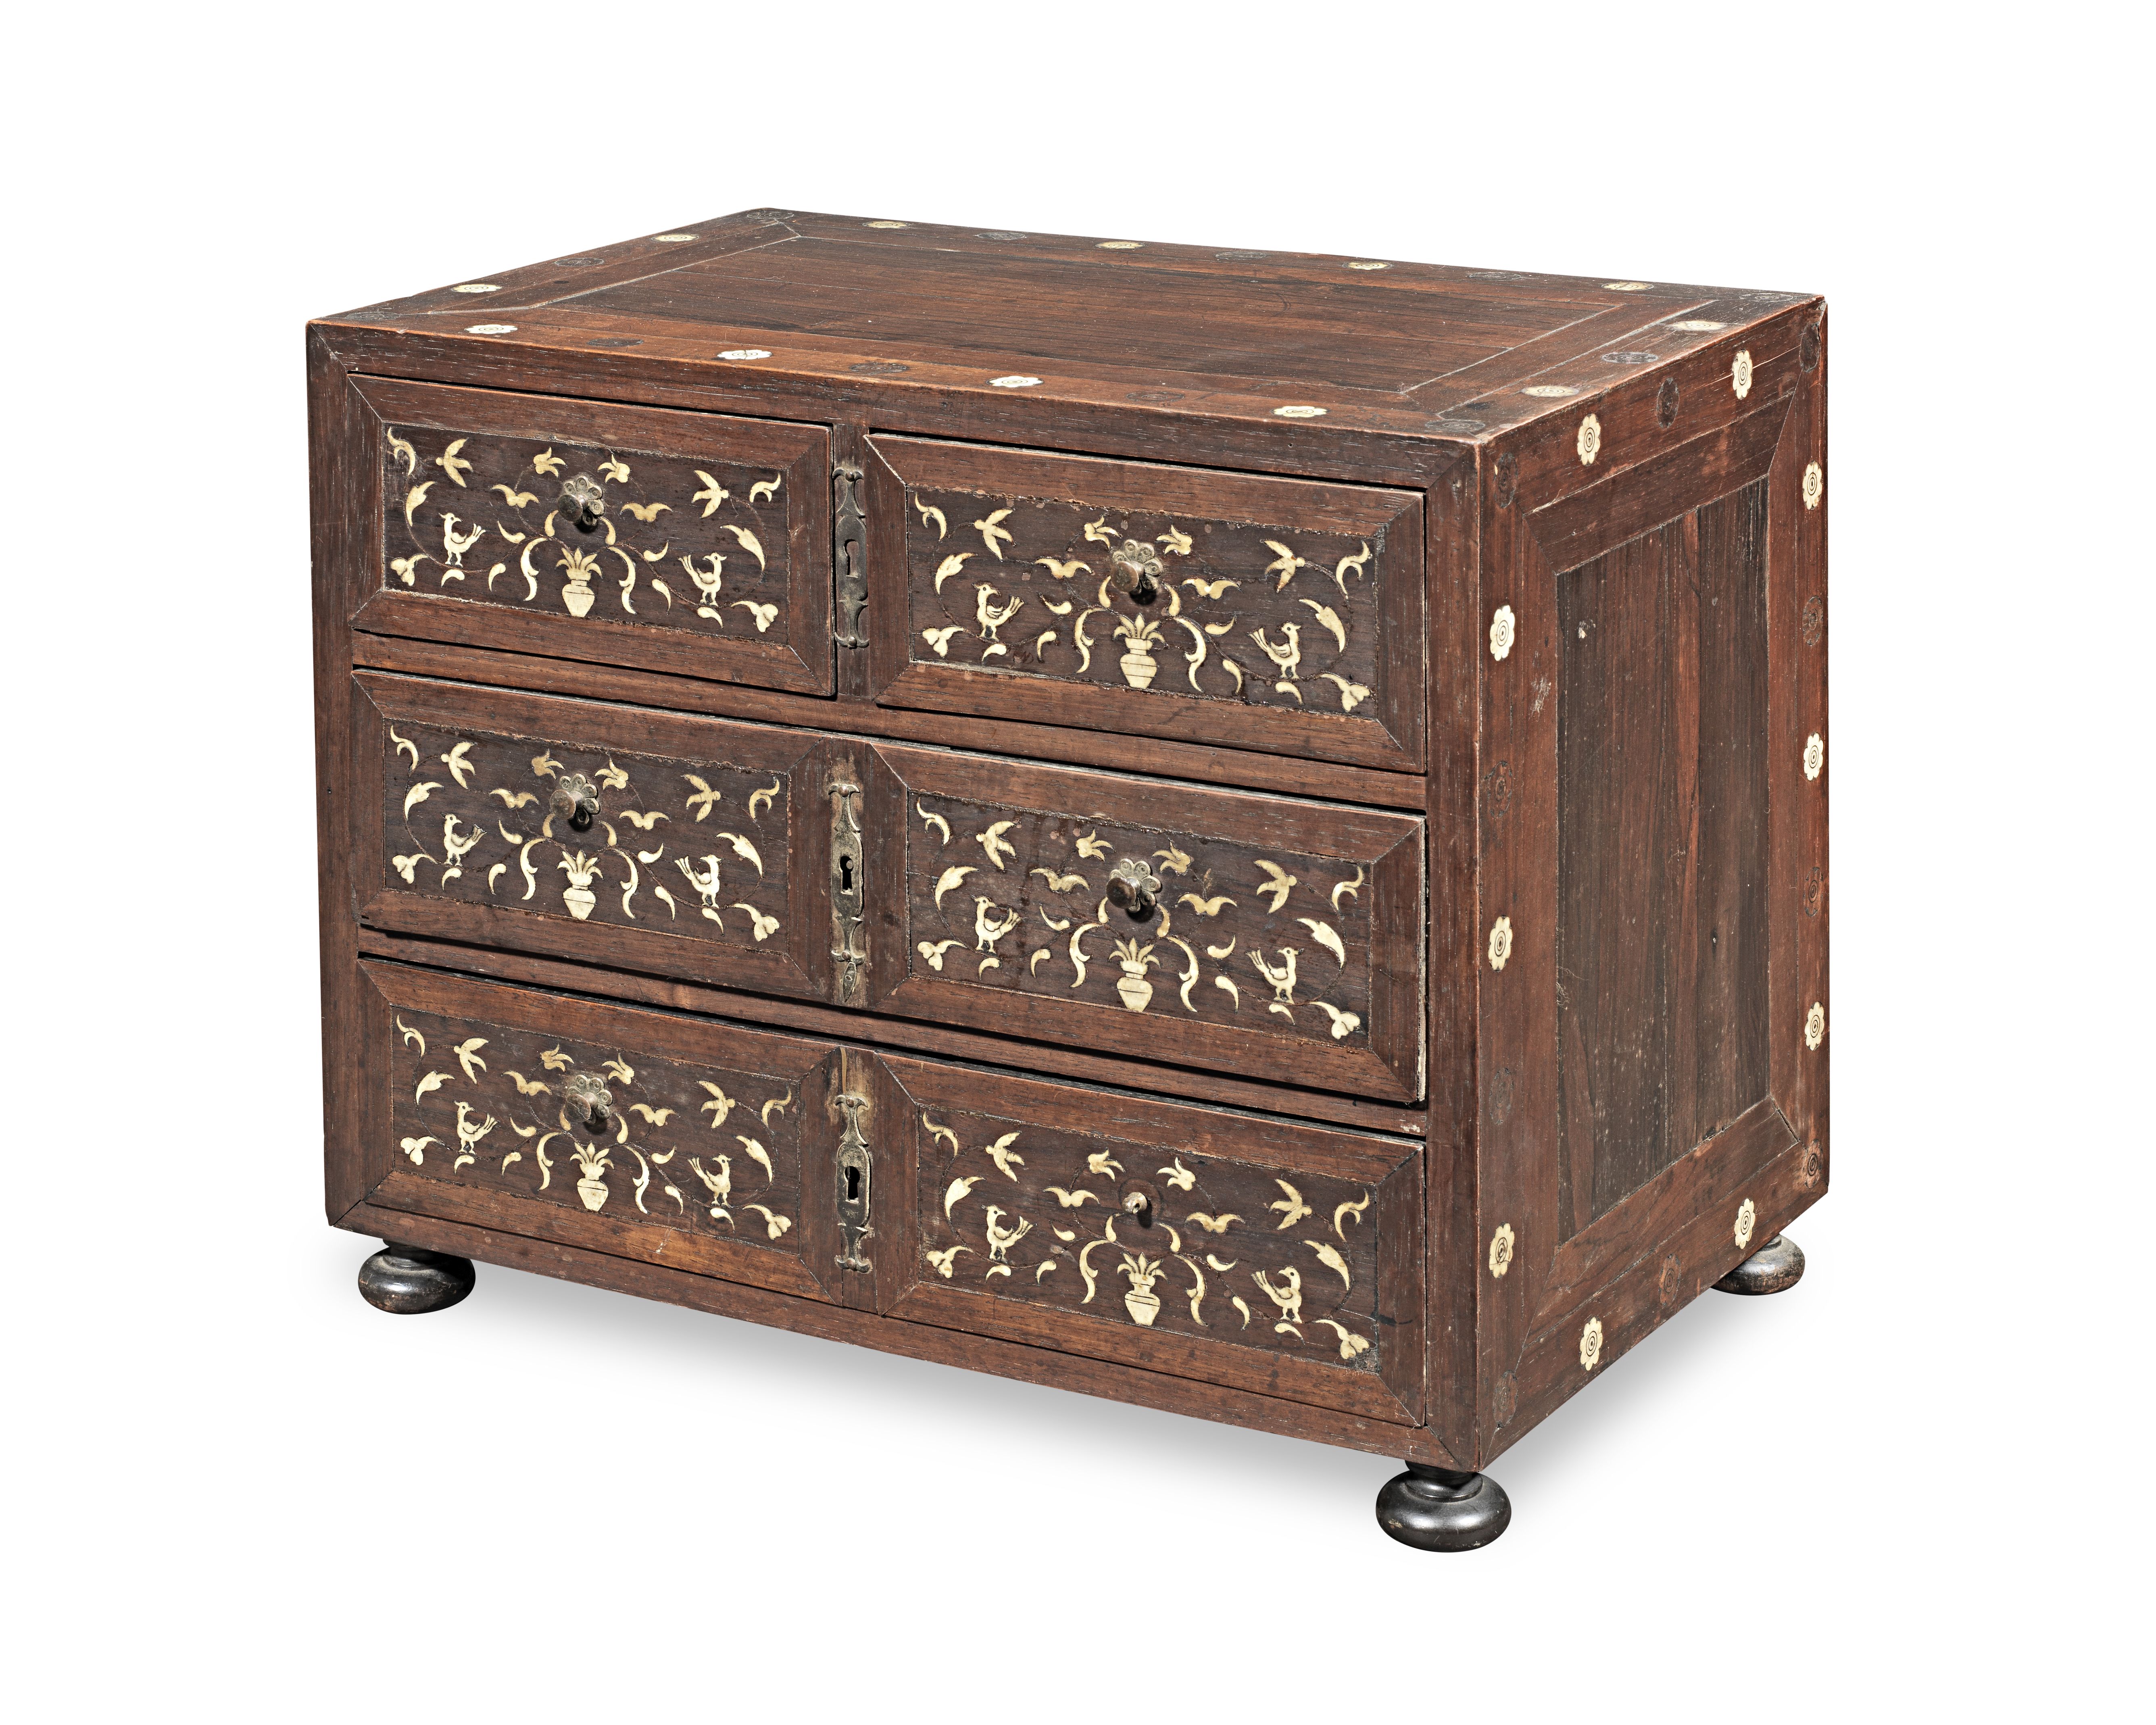 A 17th century rosewood and bone inlaid table-top cabinet, Portuguese Colonial